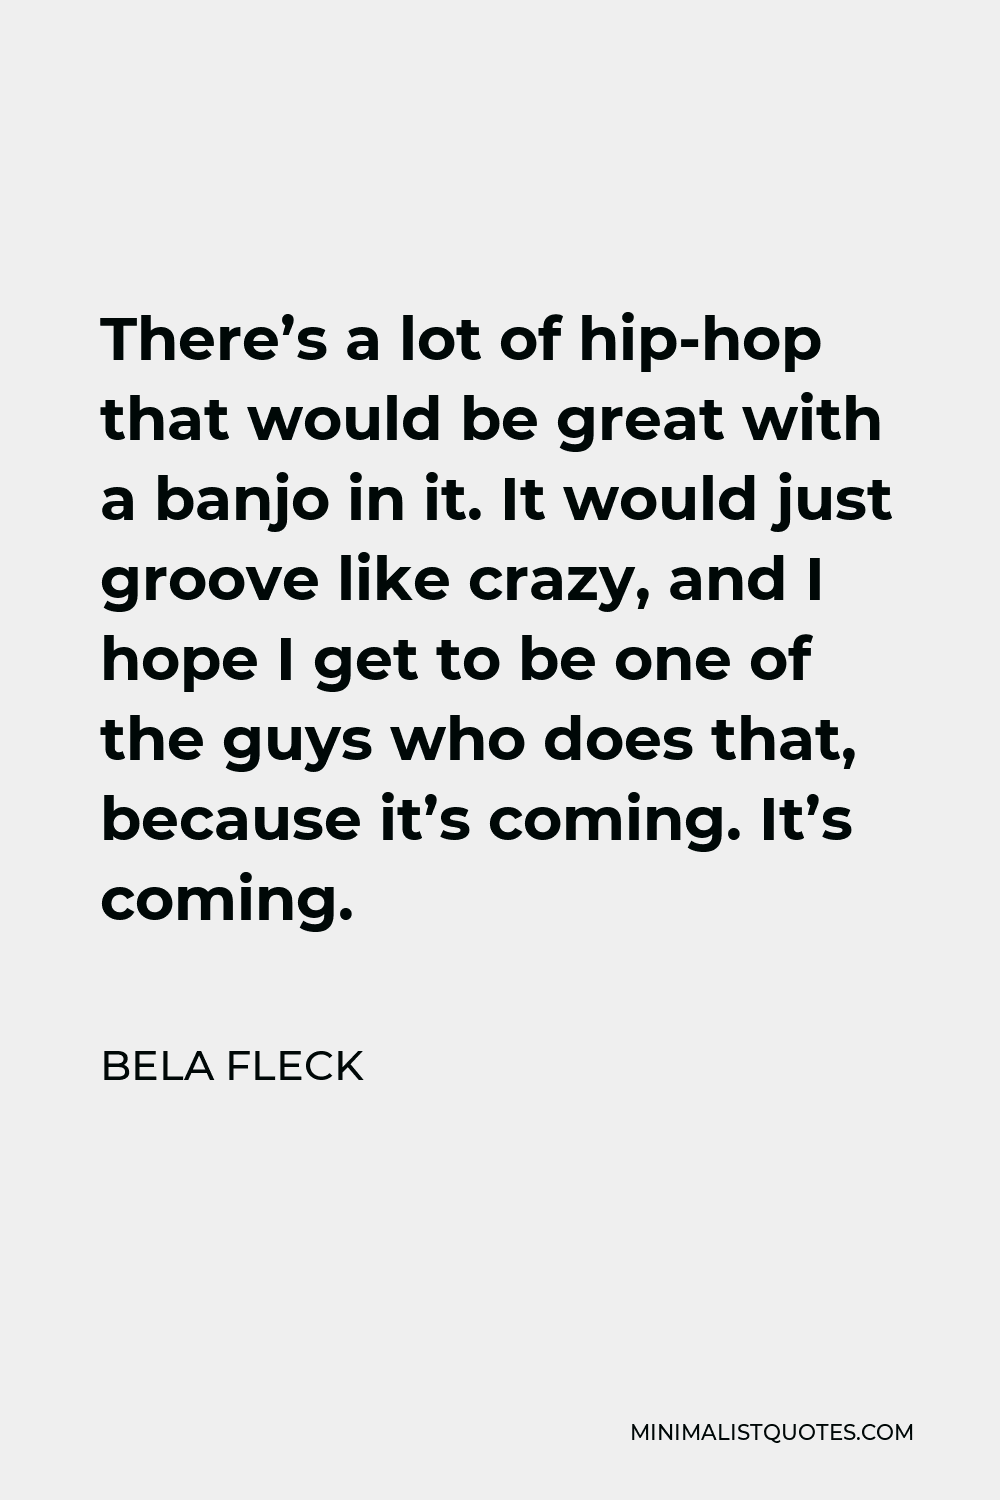 Bela Fleck Quote - There’s a lot of hip-hop that would be great with a banjo in it. It would just groove like crazy, and I hope I get to be one of the guys who does that, because it’s coming. It’s coming.